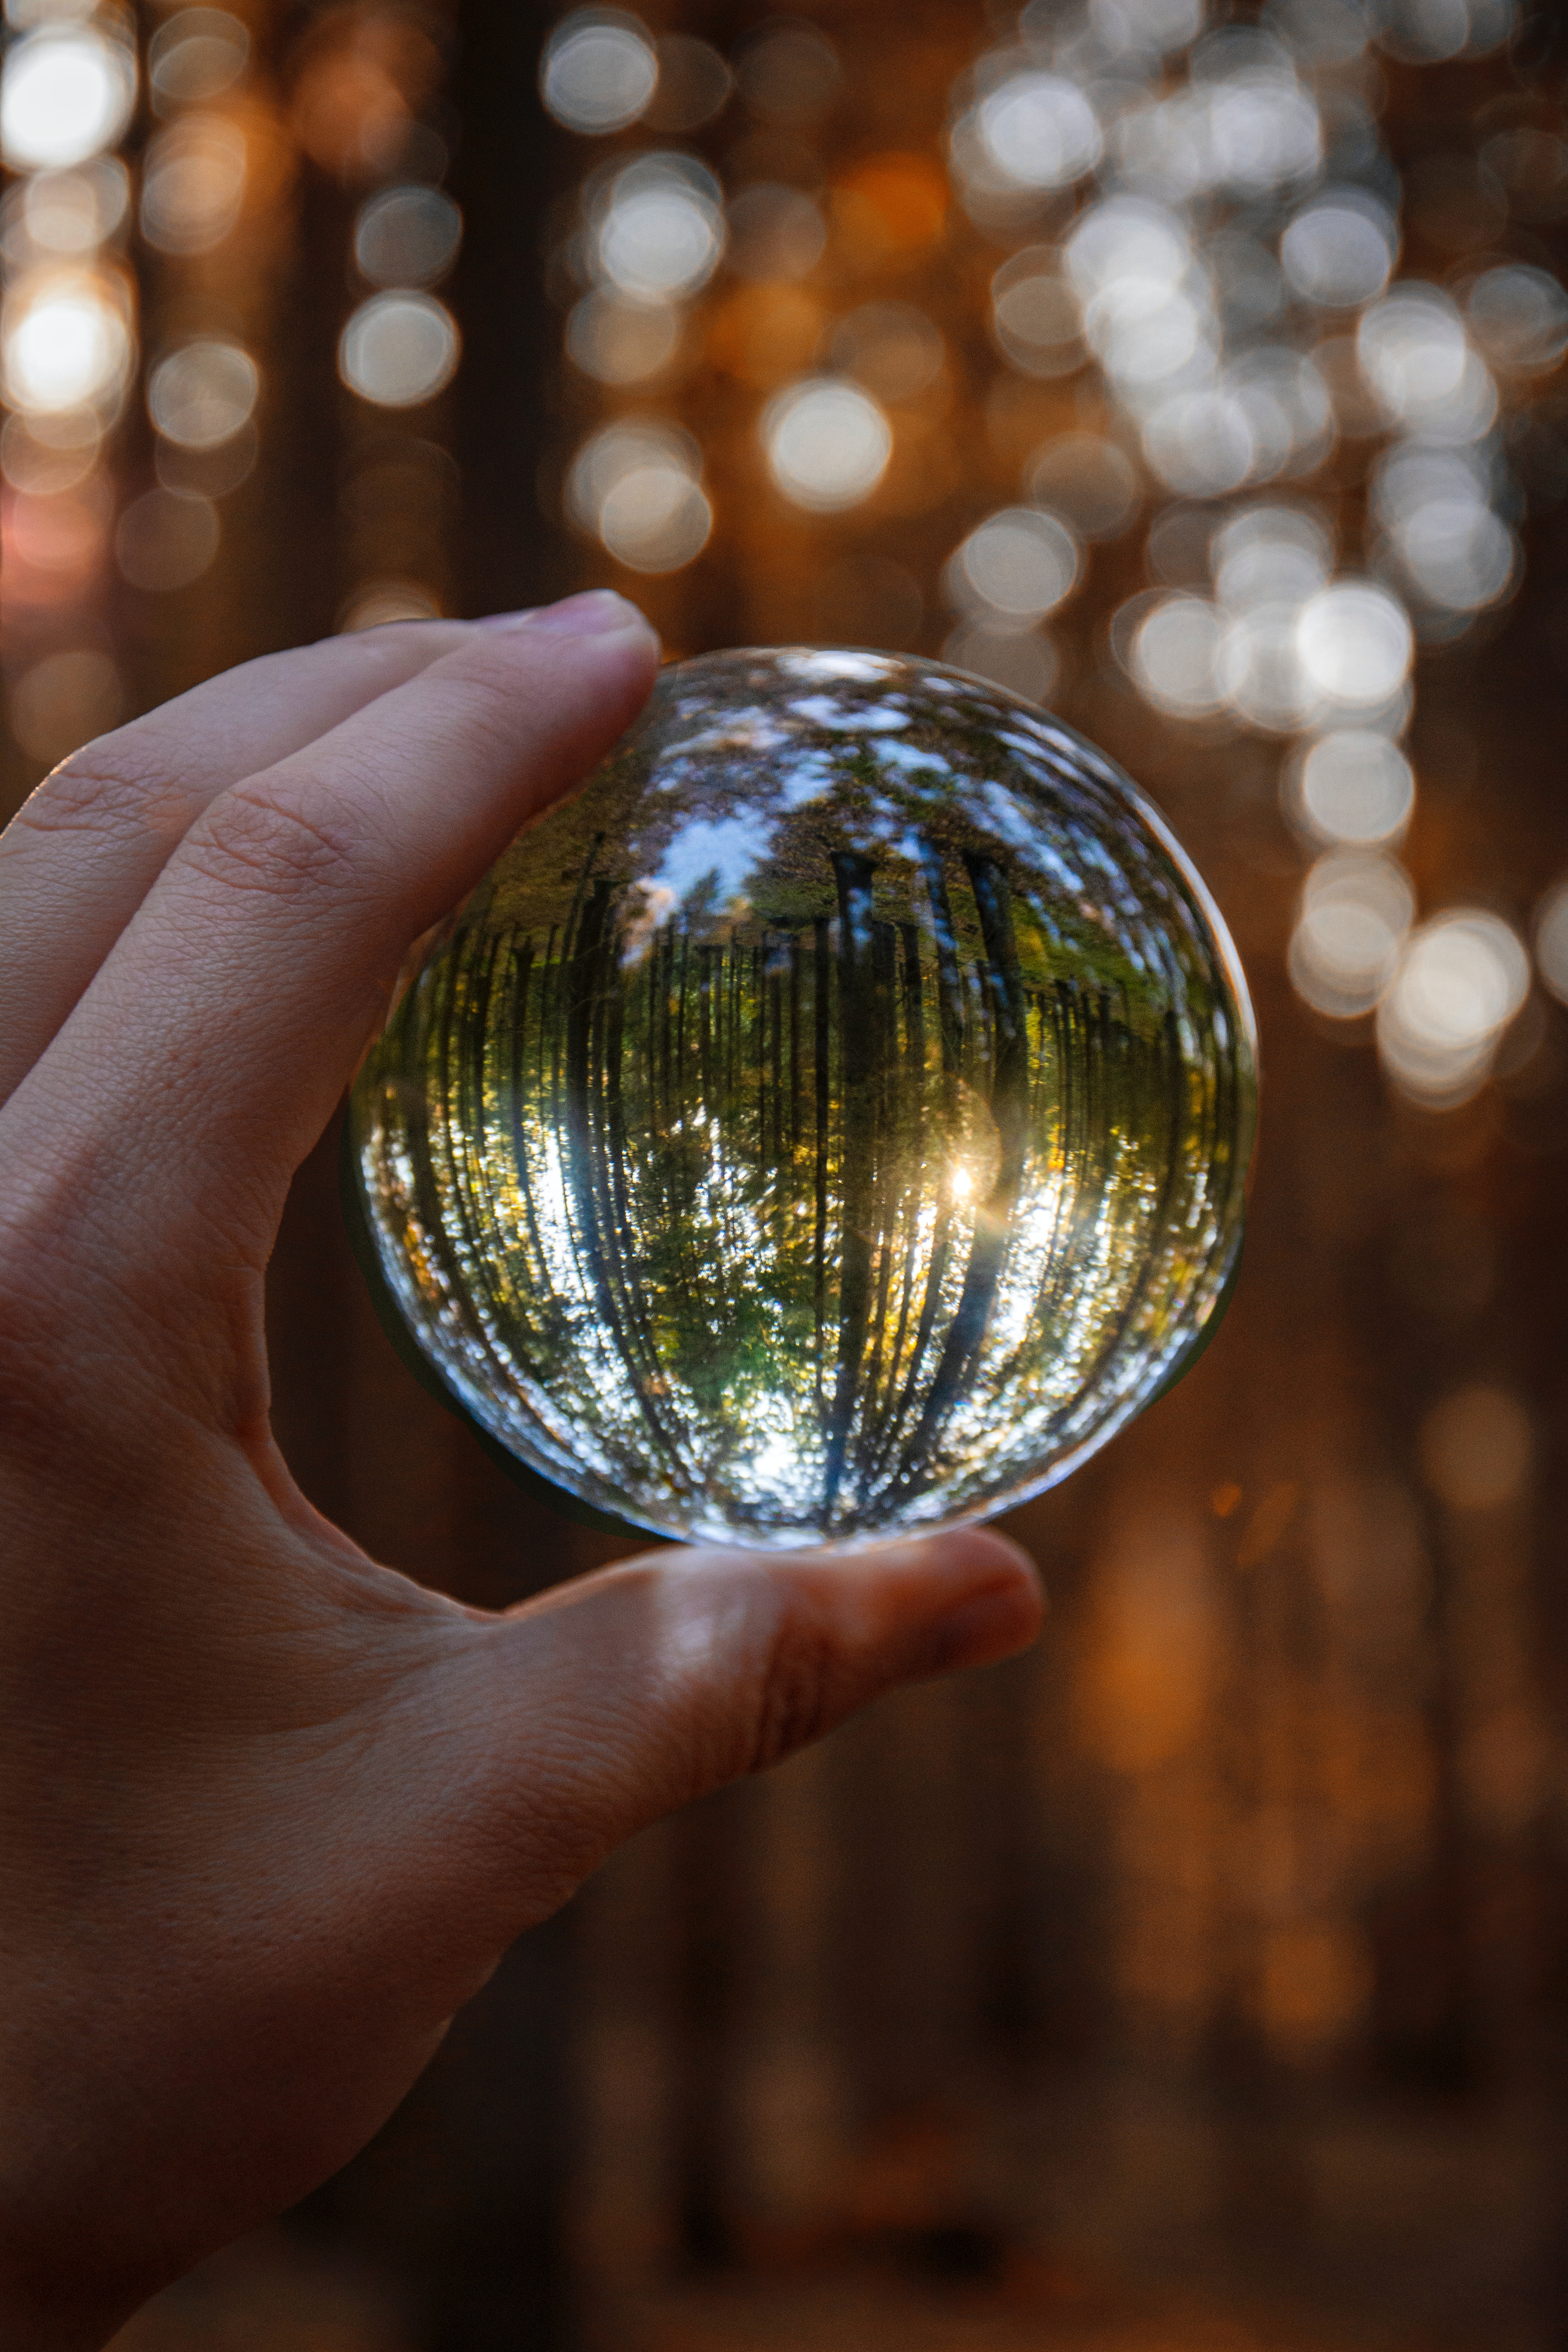 Close-up of hand holding a glass ball, in which trees in a forest is reflected upside down. Picture by Artem Saranin from Pexels.com